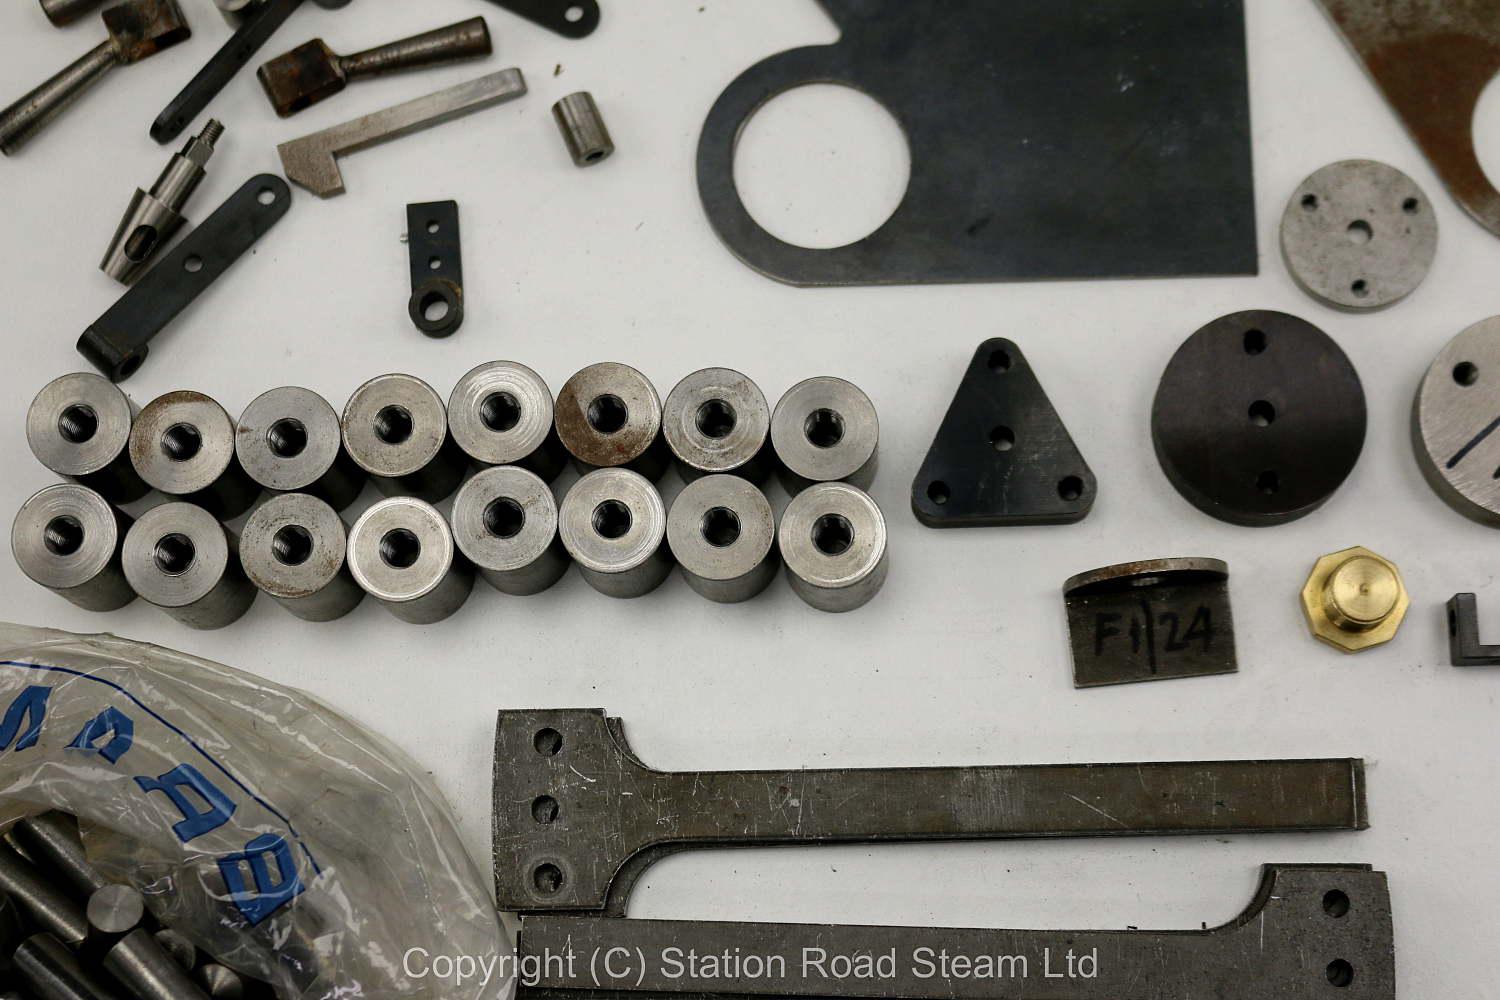 Wheels, boiler kit and professionally machined parts for 4 inch scale Foster